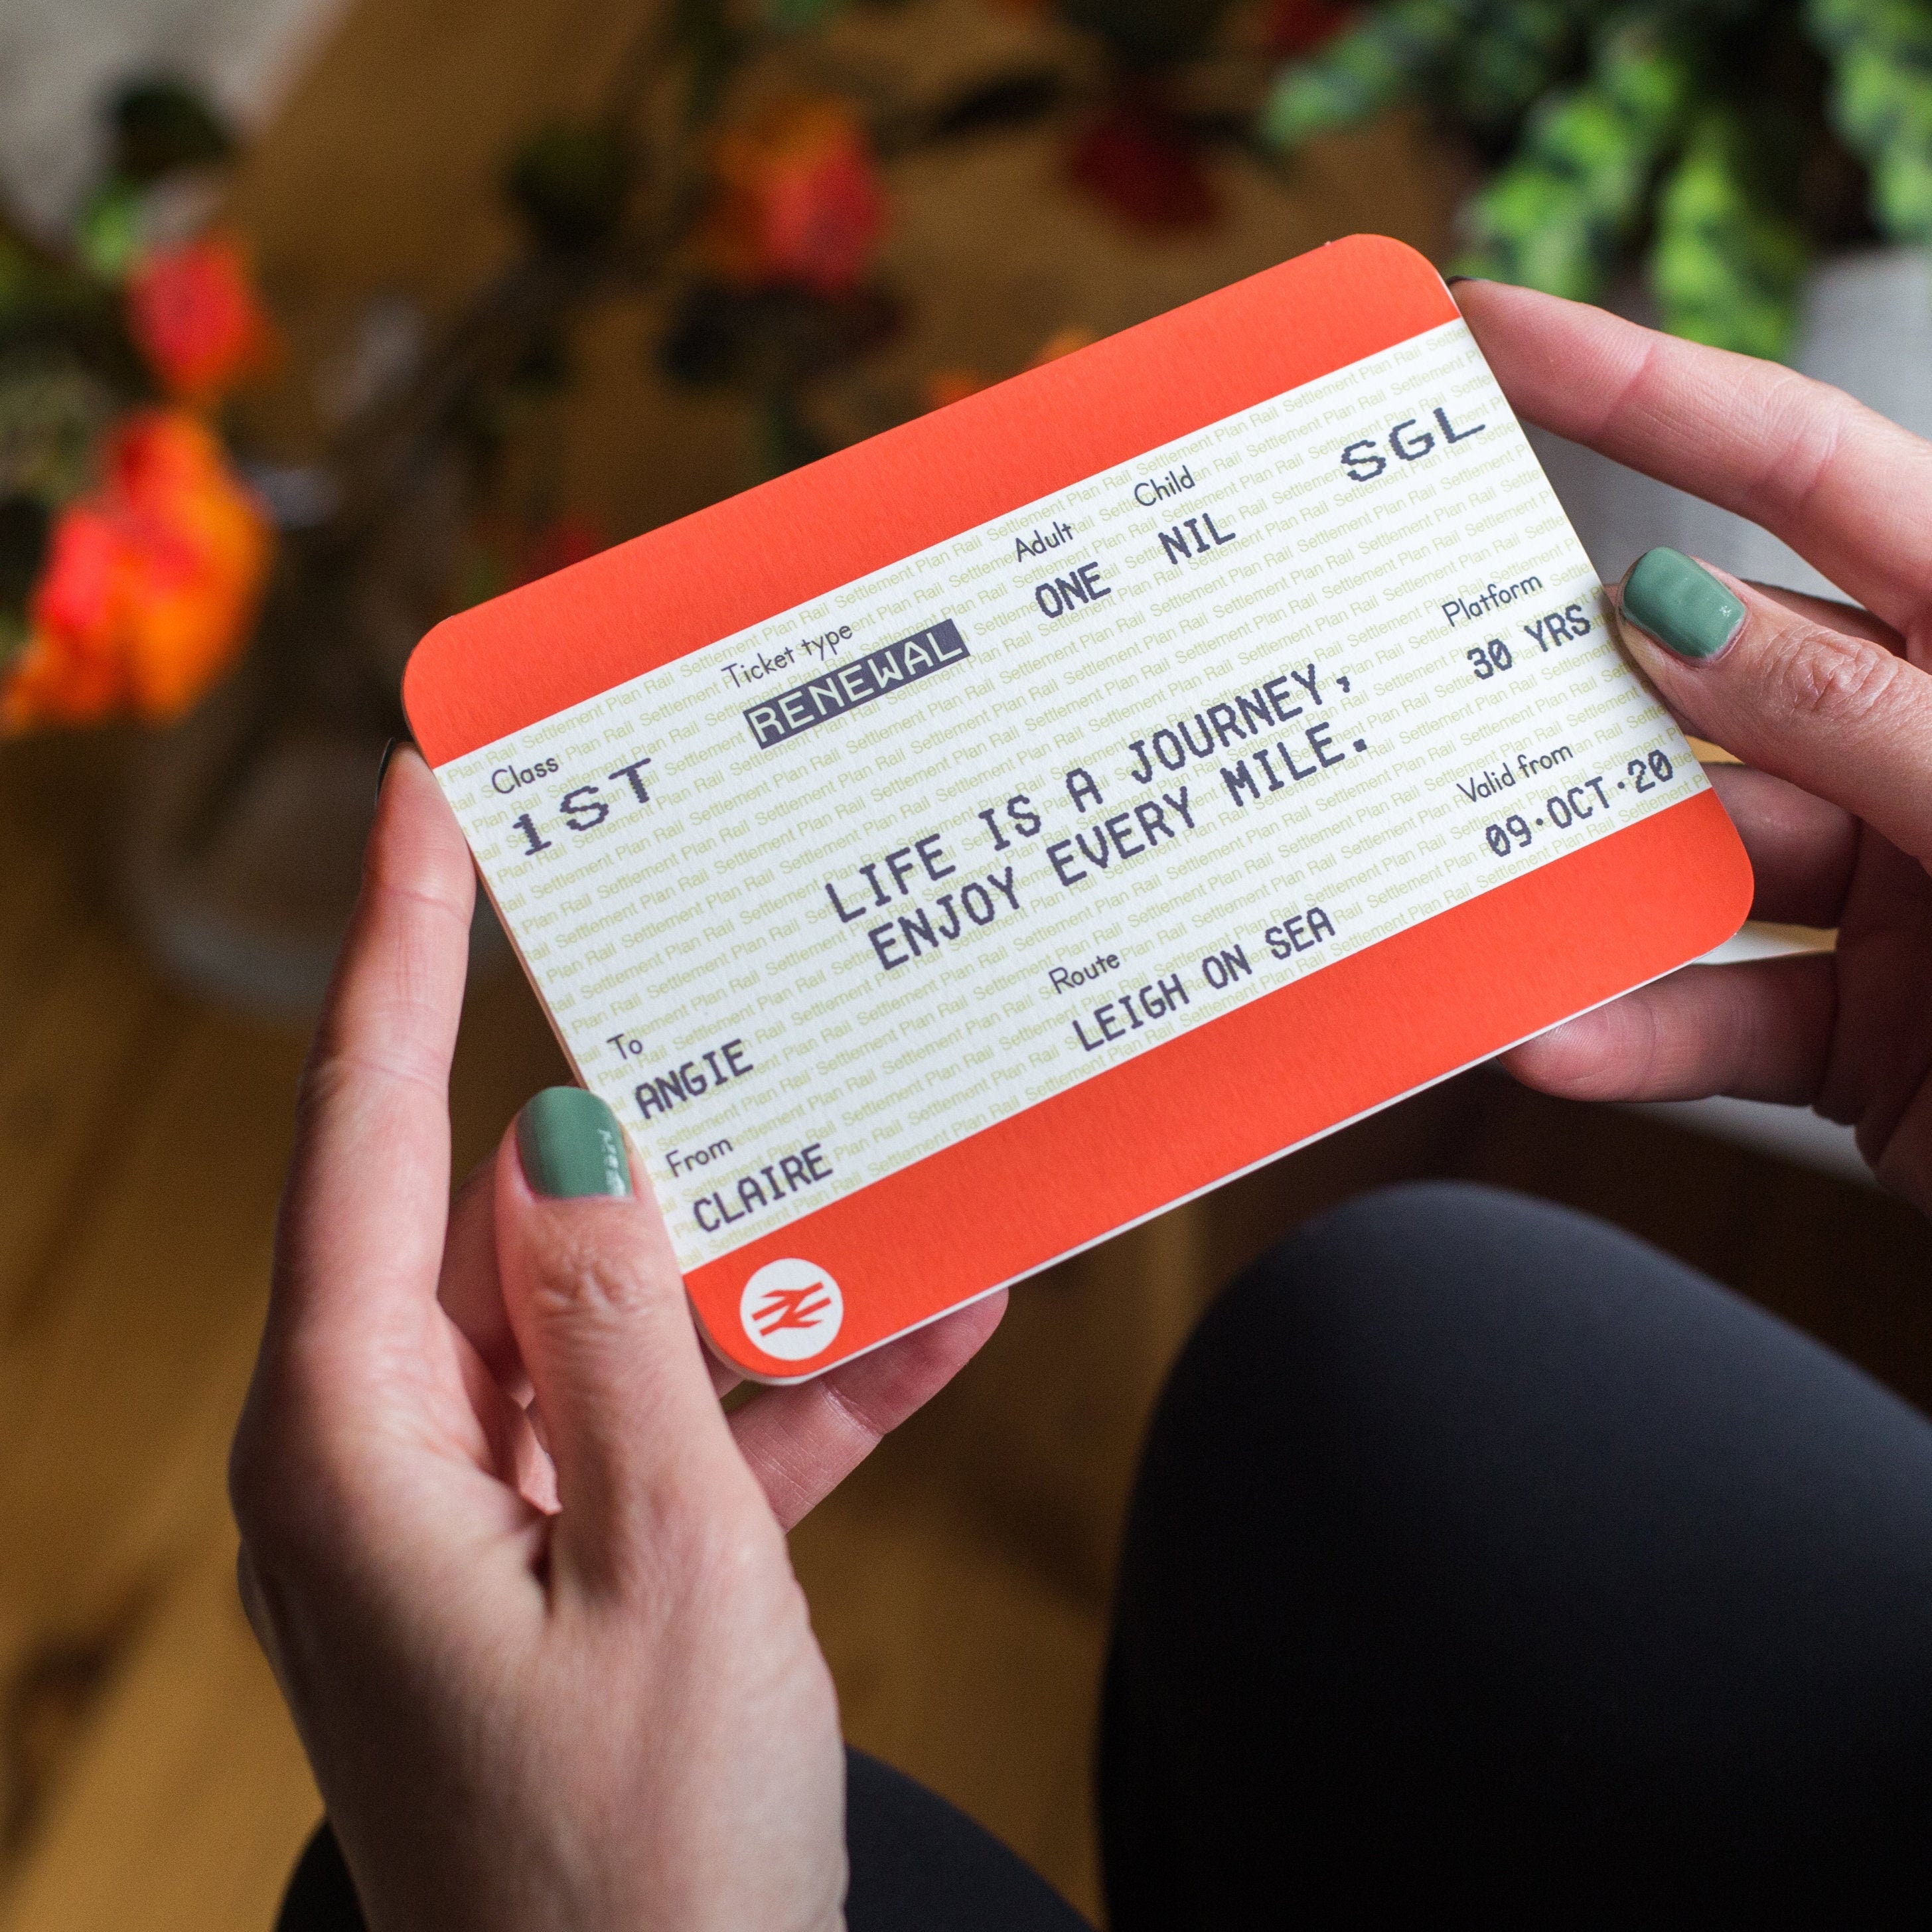 group travel train ticket